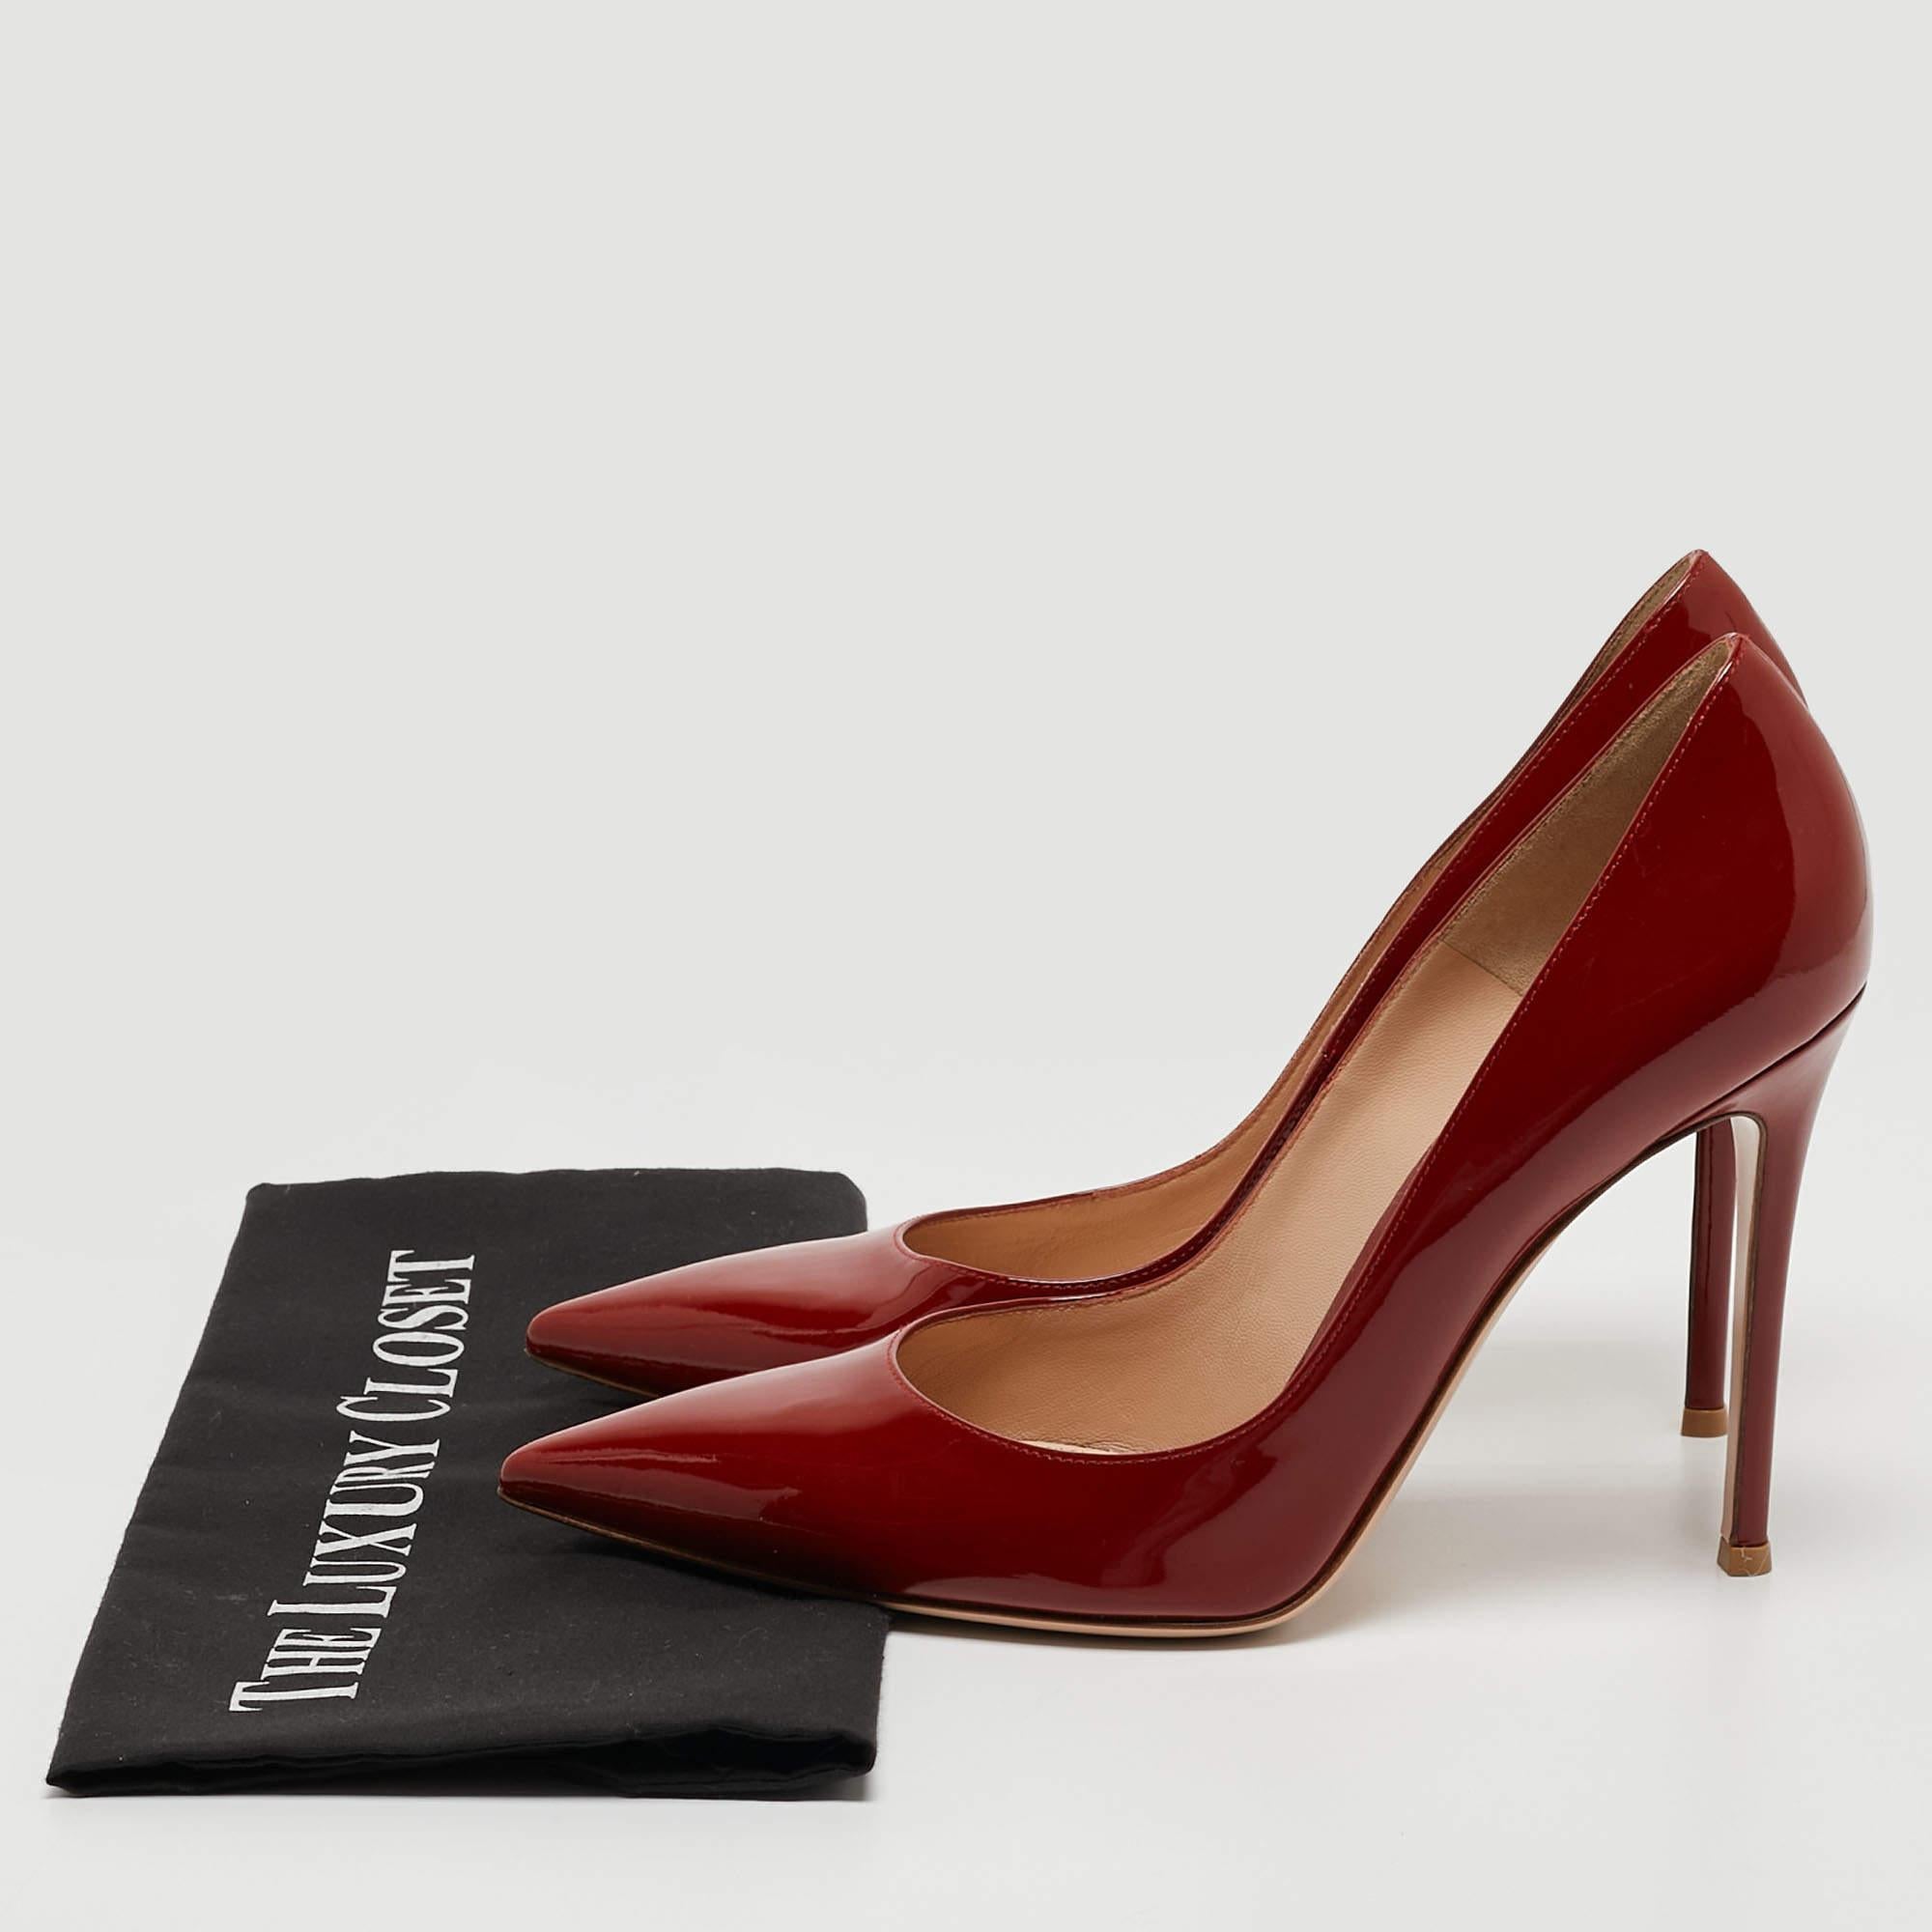 Gianvito Rossi Dark Red Patent Leather Pointed Toe Pumps Size 41 5